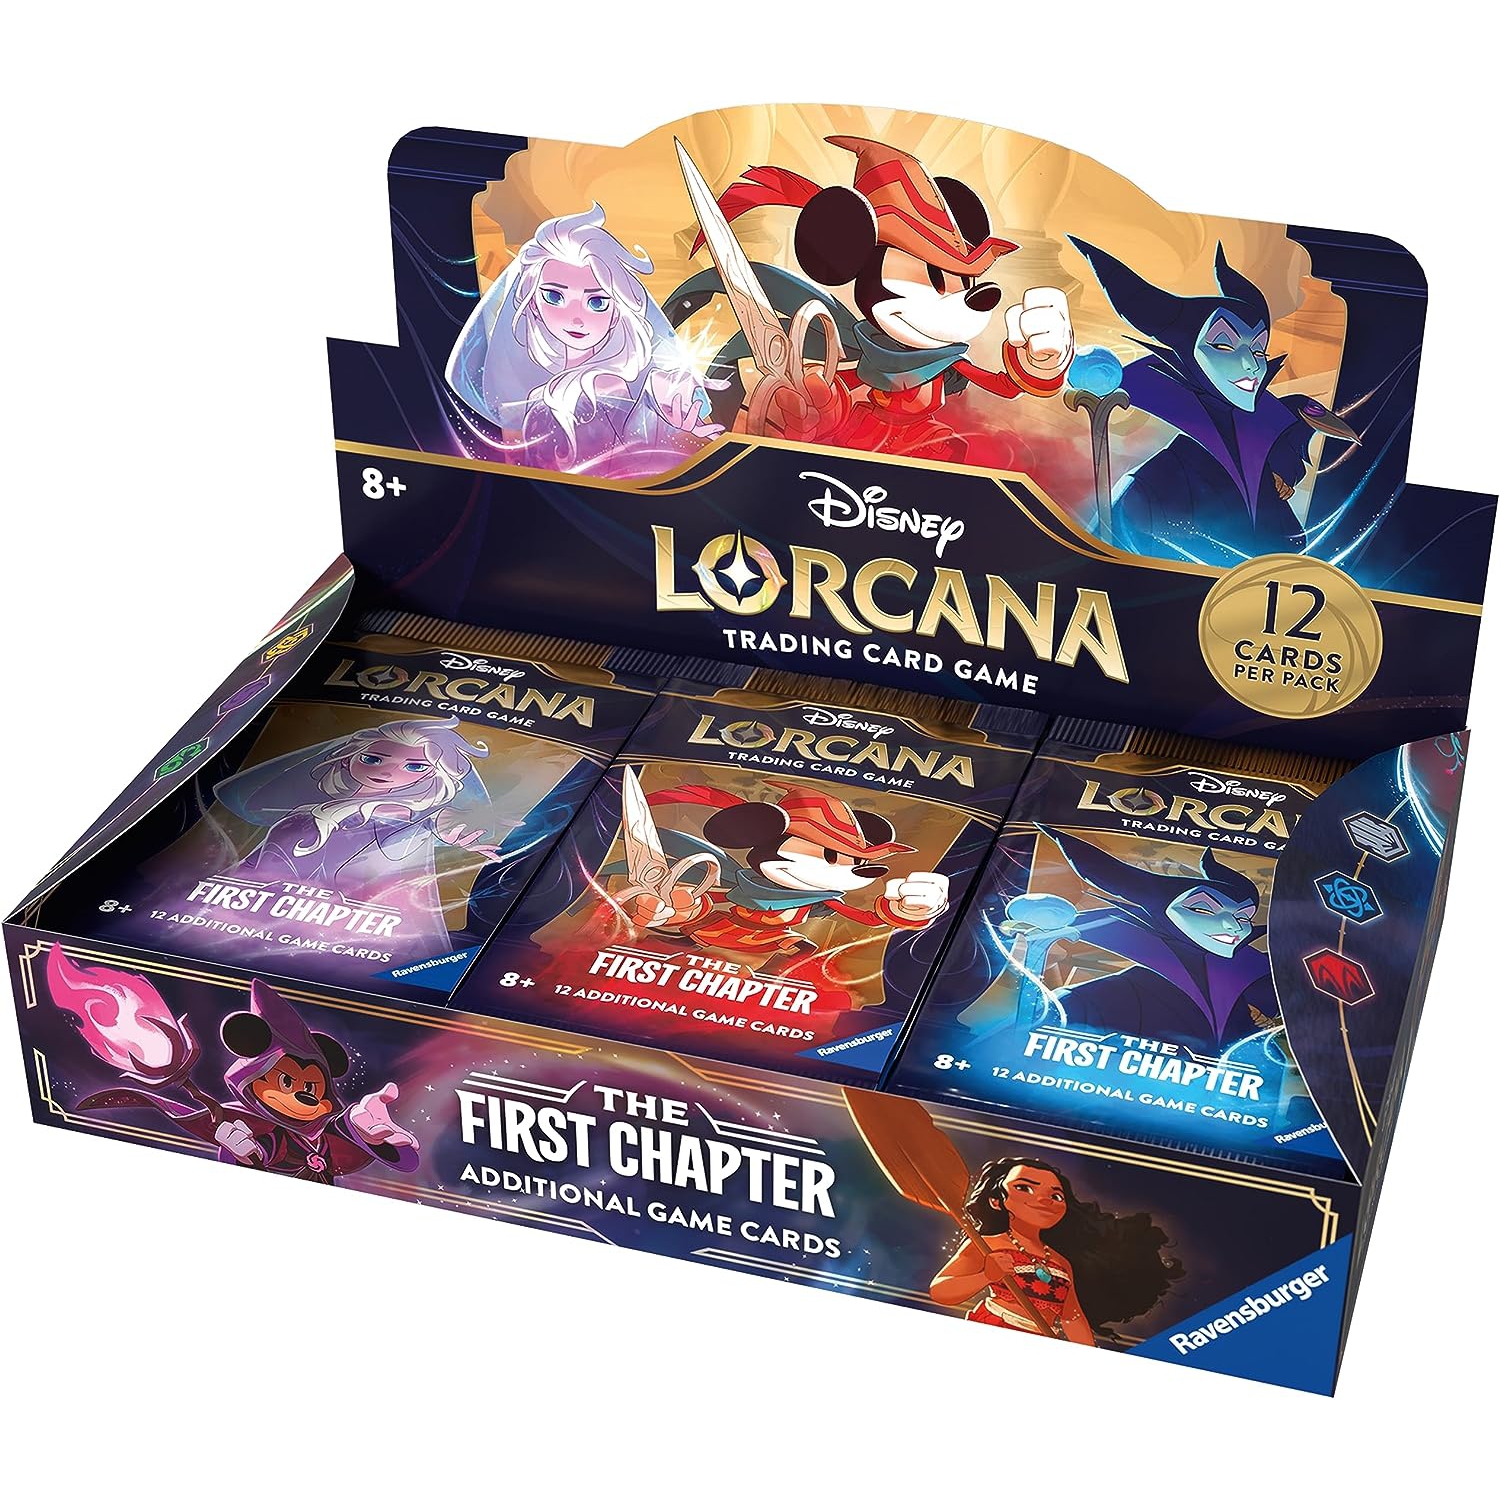 Ravensburger Disney Lorcana Trading Card Game: The First Chapter - 24 Packs